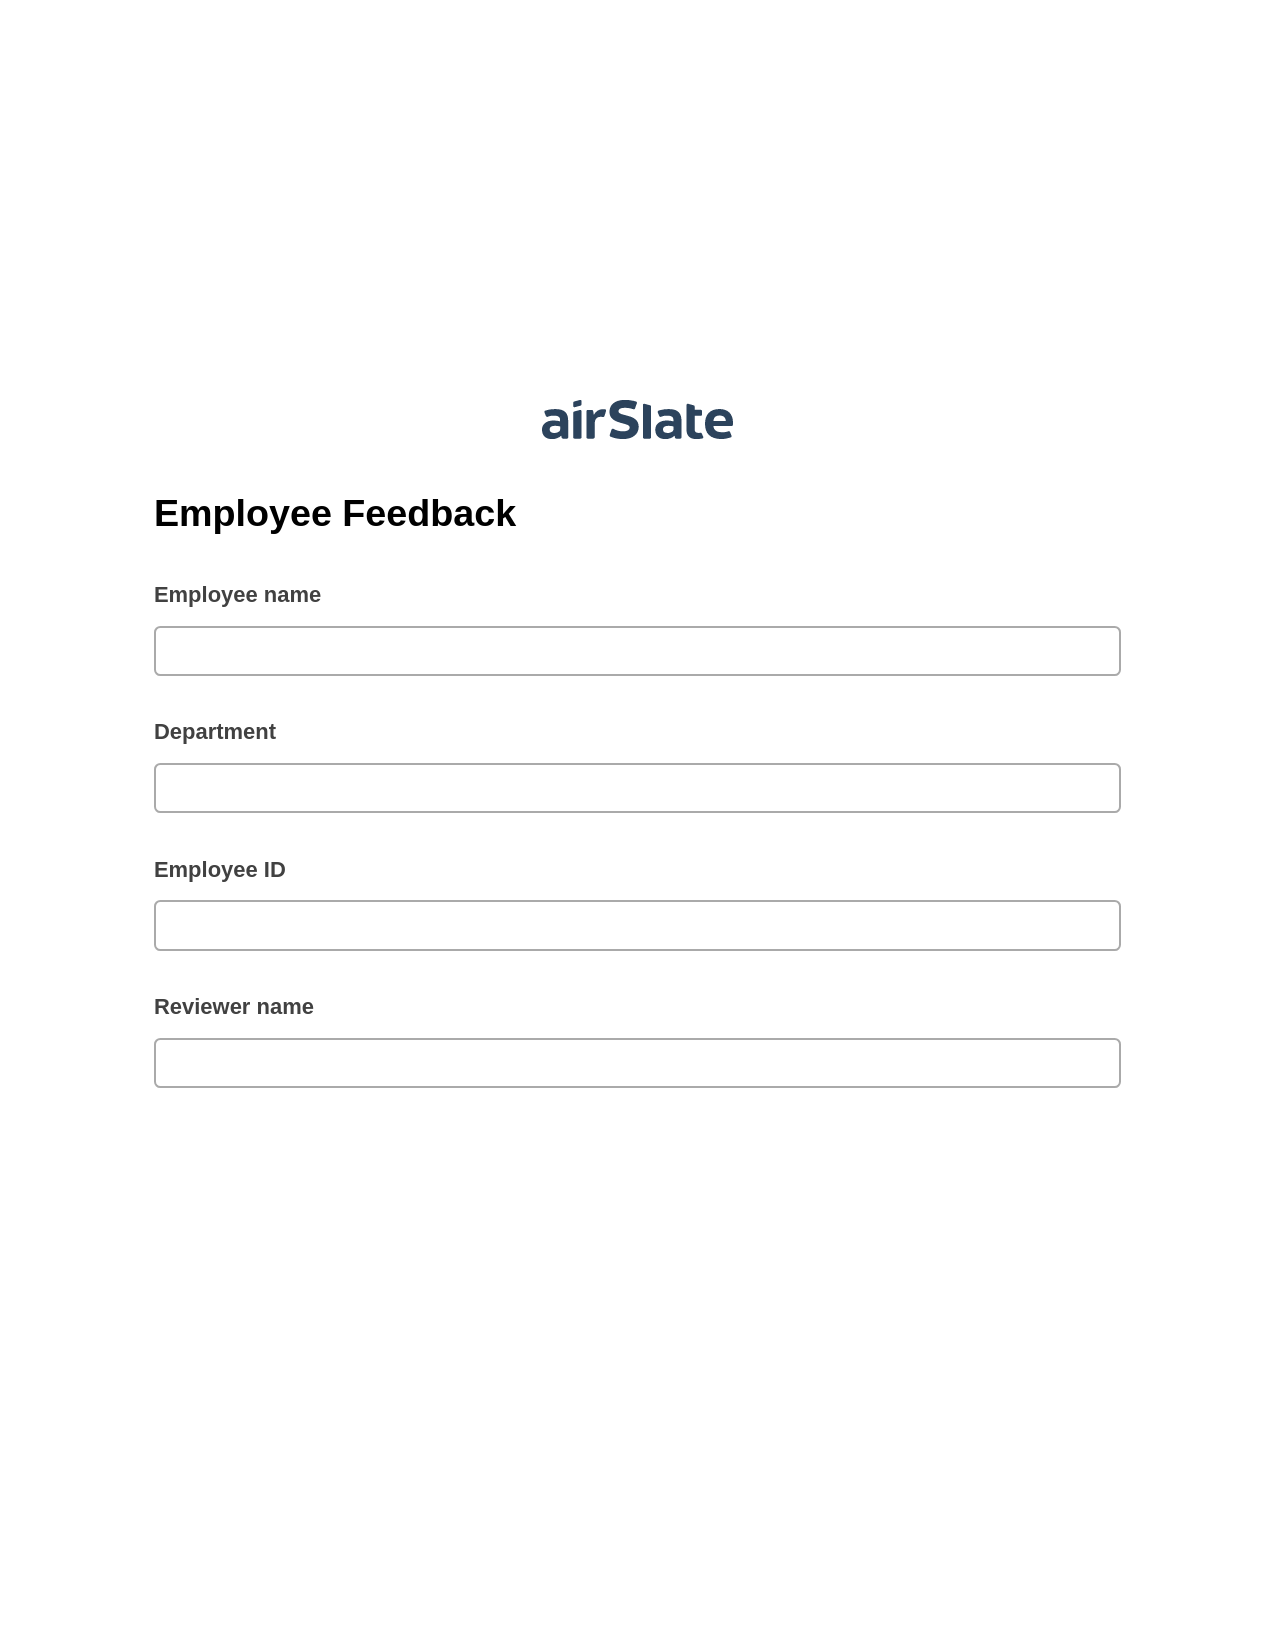 Multirole Employee Feedback Pre-fill from Salesforce Records with SOQL Bot, Google Calendar Bot, Archive to SharePoint Folder Bot